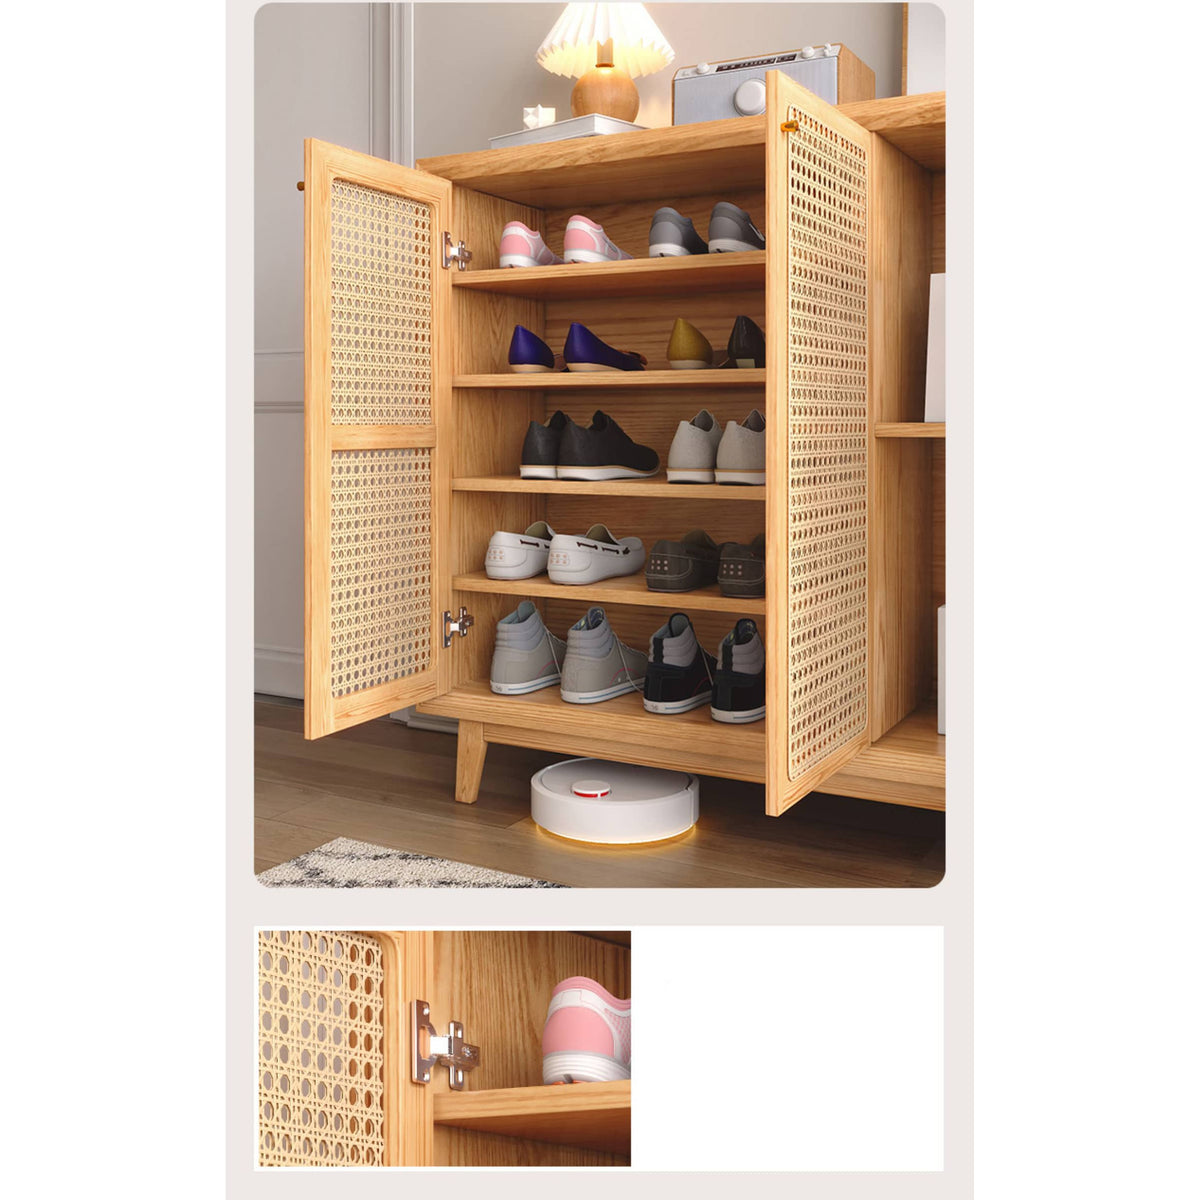 Natural Oak Wood Cabinet with Rattan Doors and Metal Accents hbzwg-647